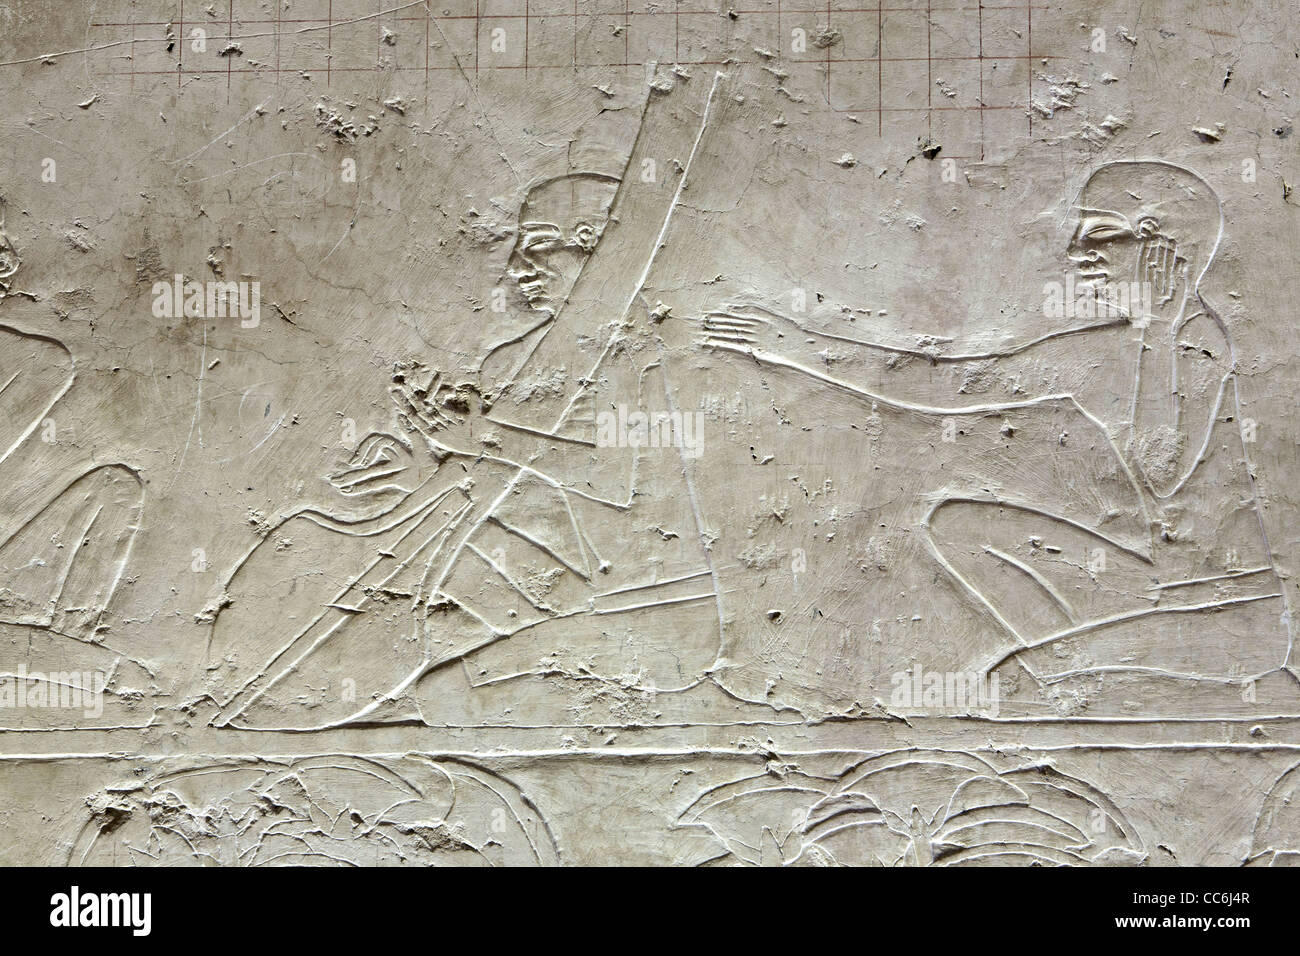 Reliefs in the Middle Kingdom tomb of Ukh Hotep Son of Senbi at Meir , North West of Asyut in Middle Egypt Stock Photo